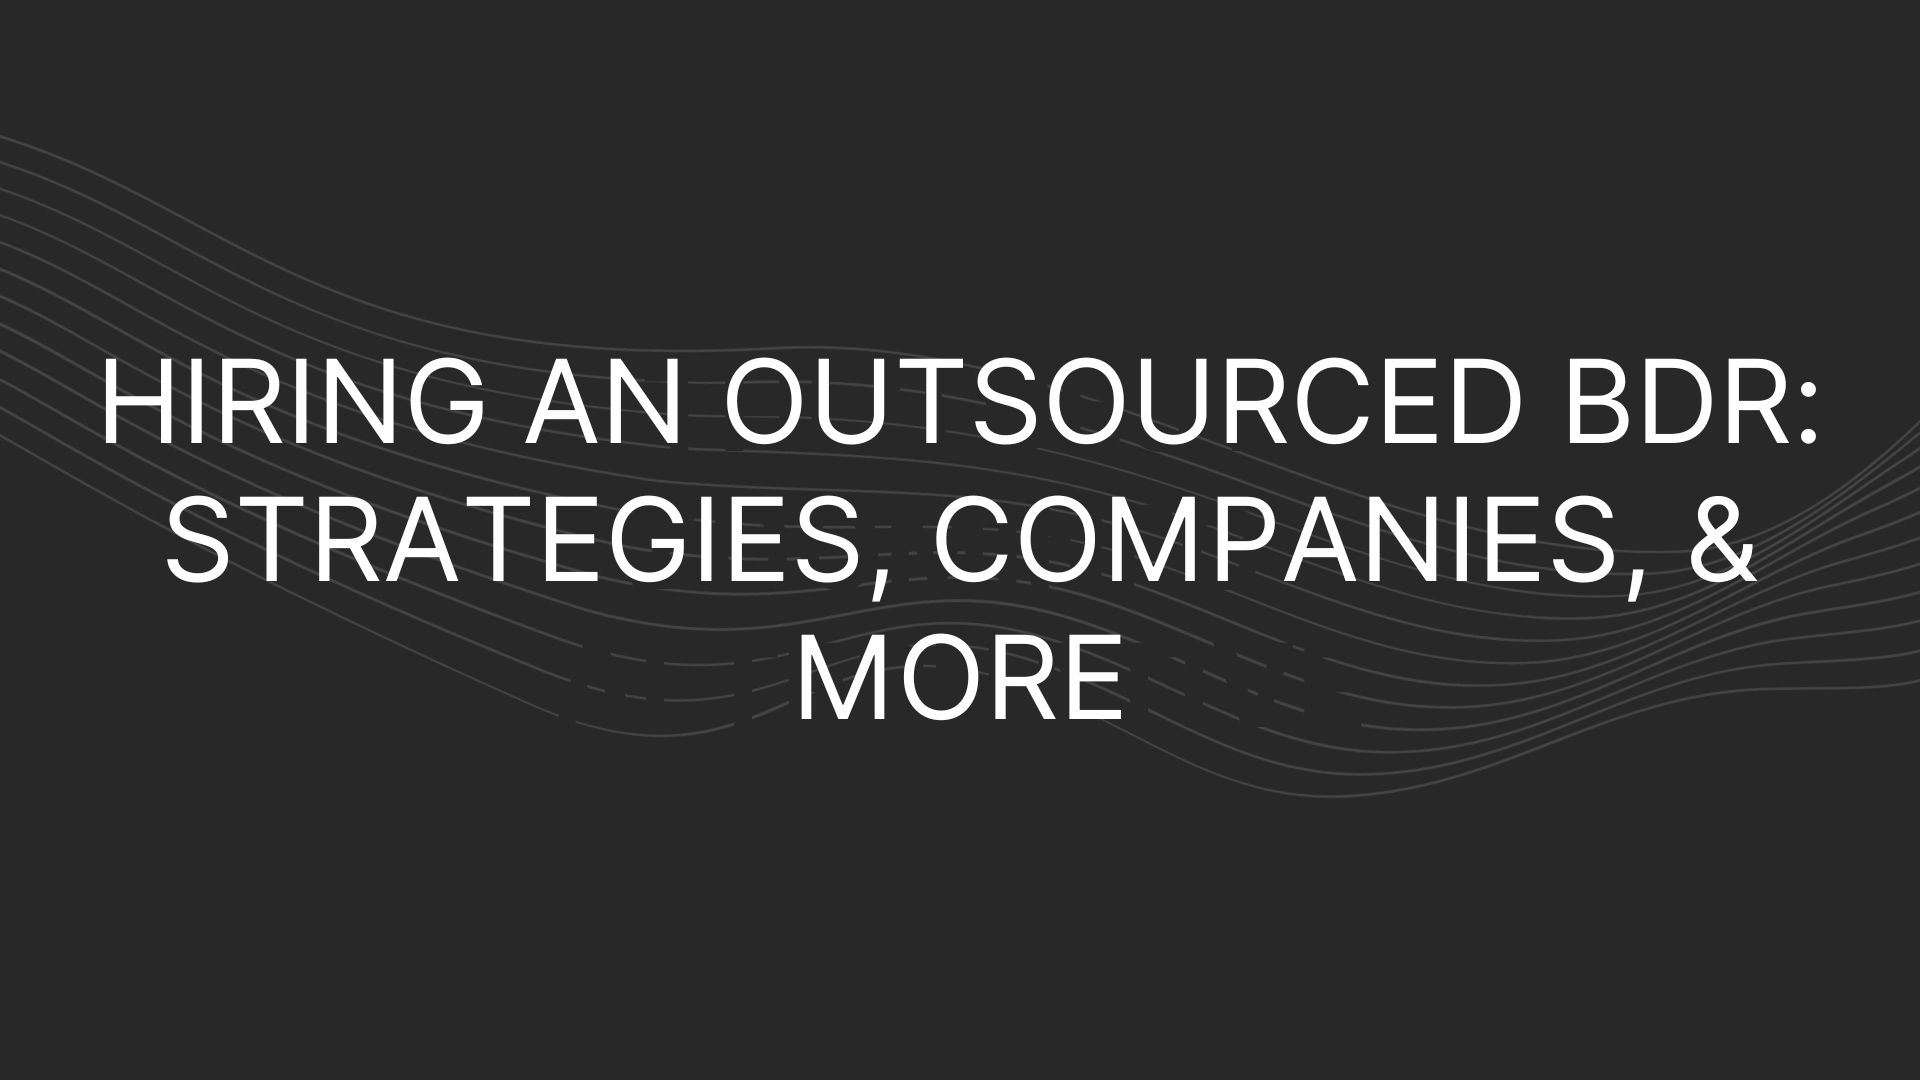 Outsourced BDR